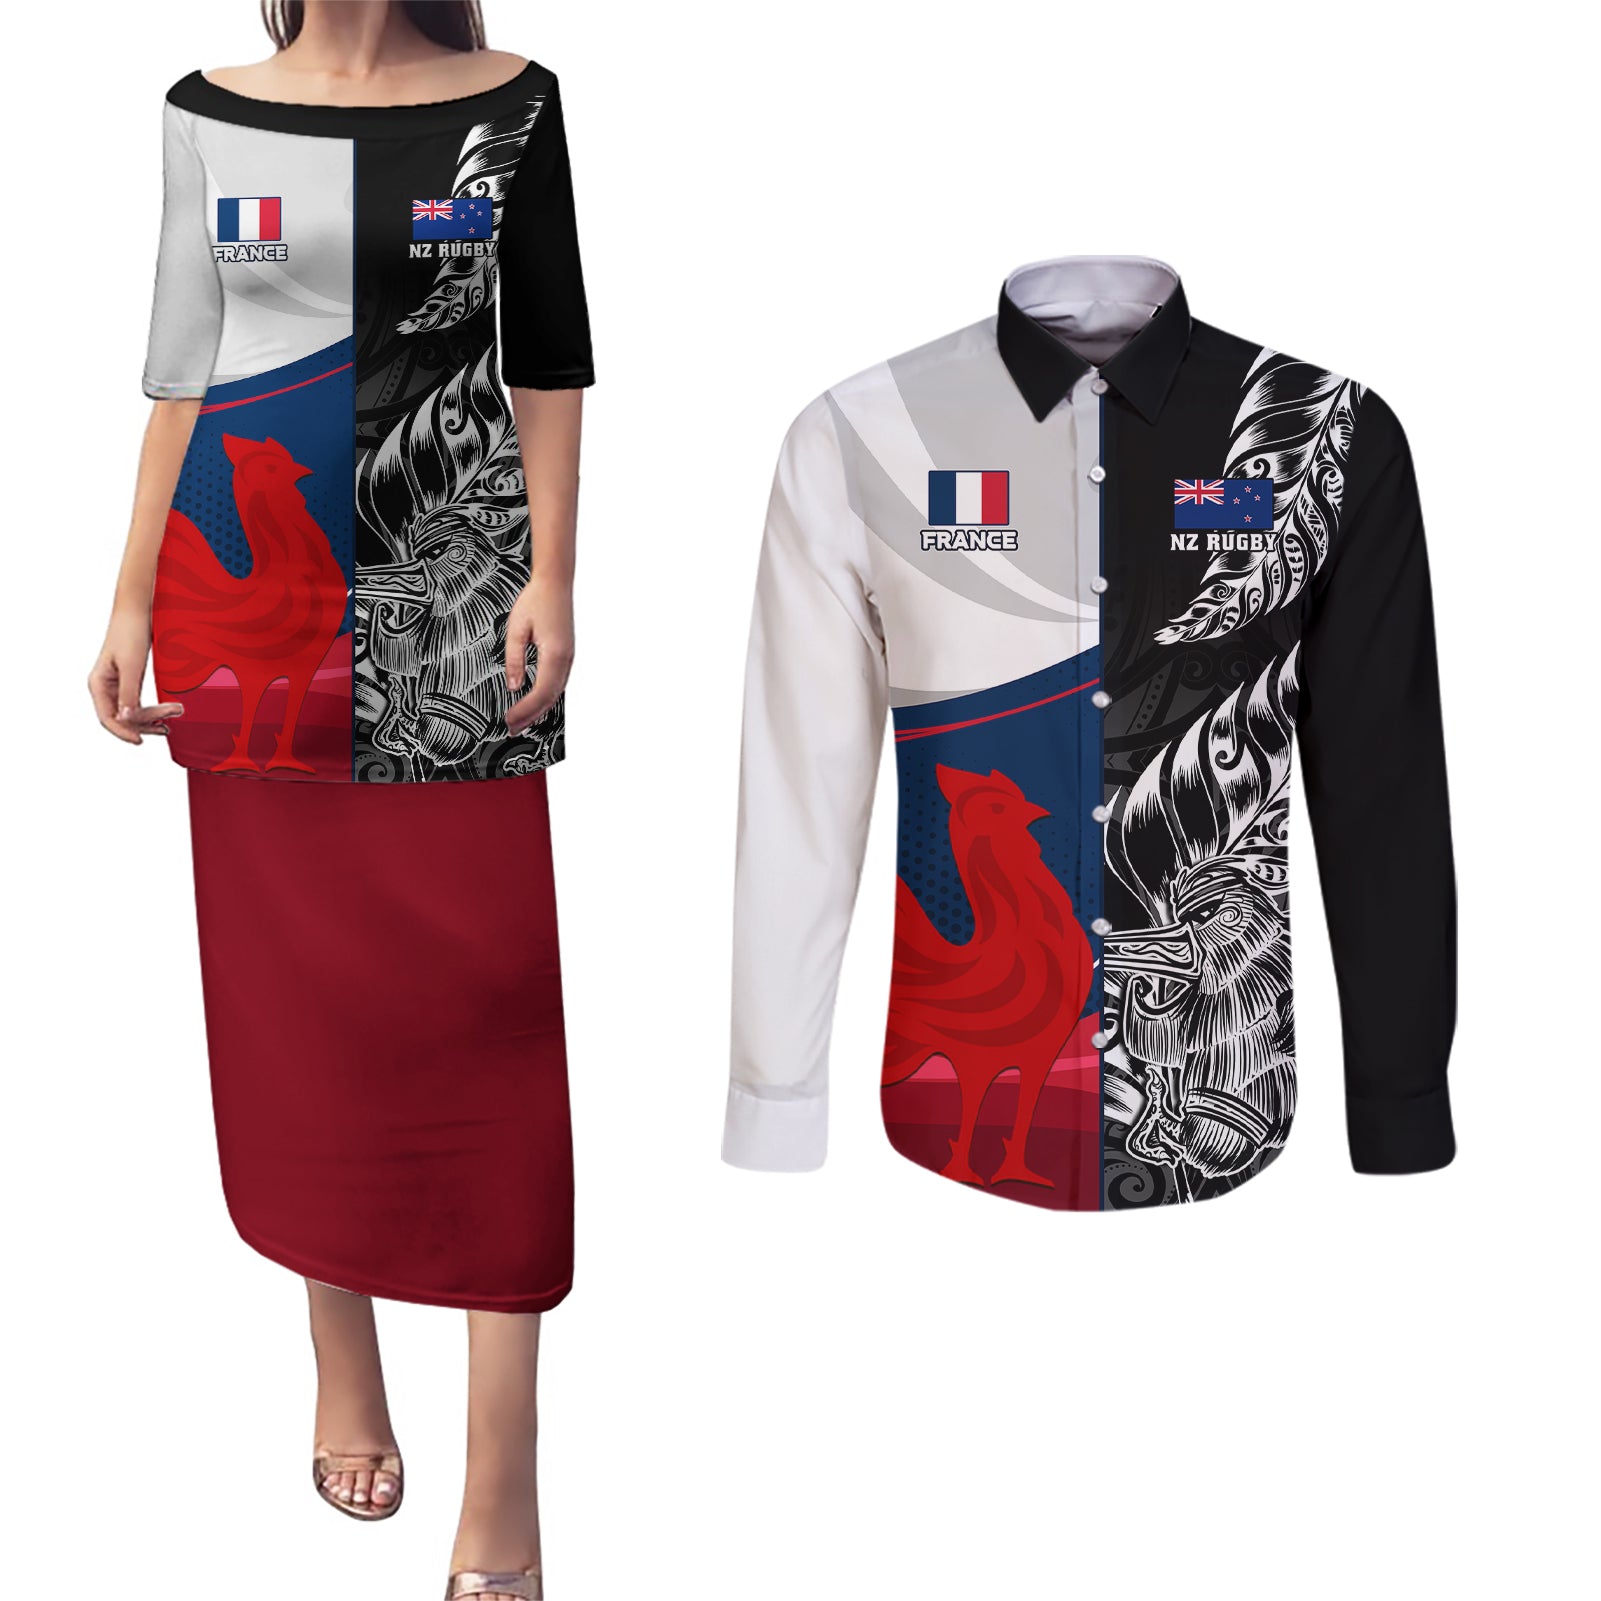 custom-new-zealand-and-france-rugby-couples-matching-puletasi-dress-and-long-sleeve-button-shirts-xv-de-france-kiwi-silver-fern-2023-world-cup